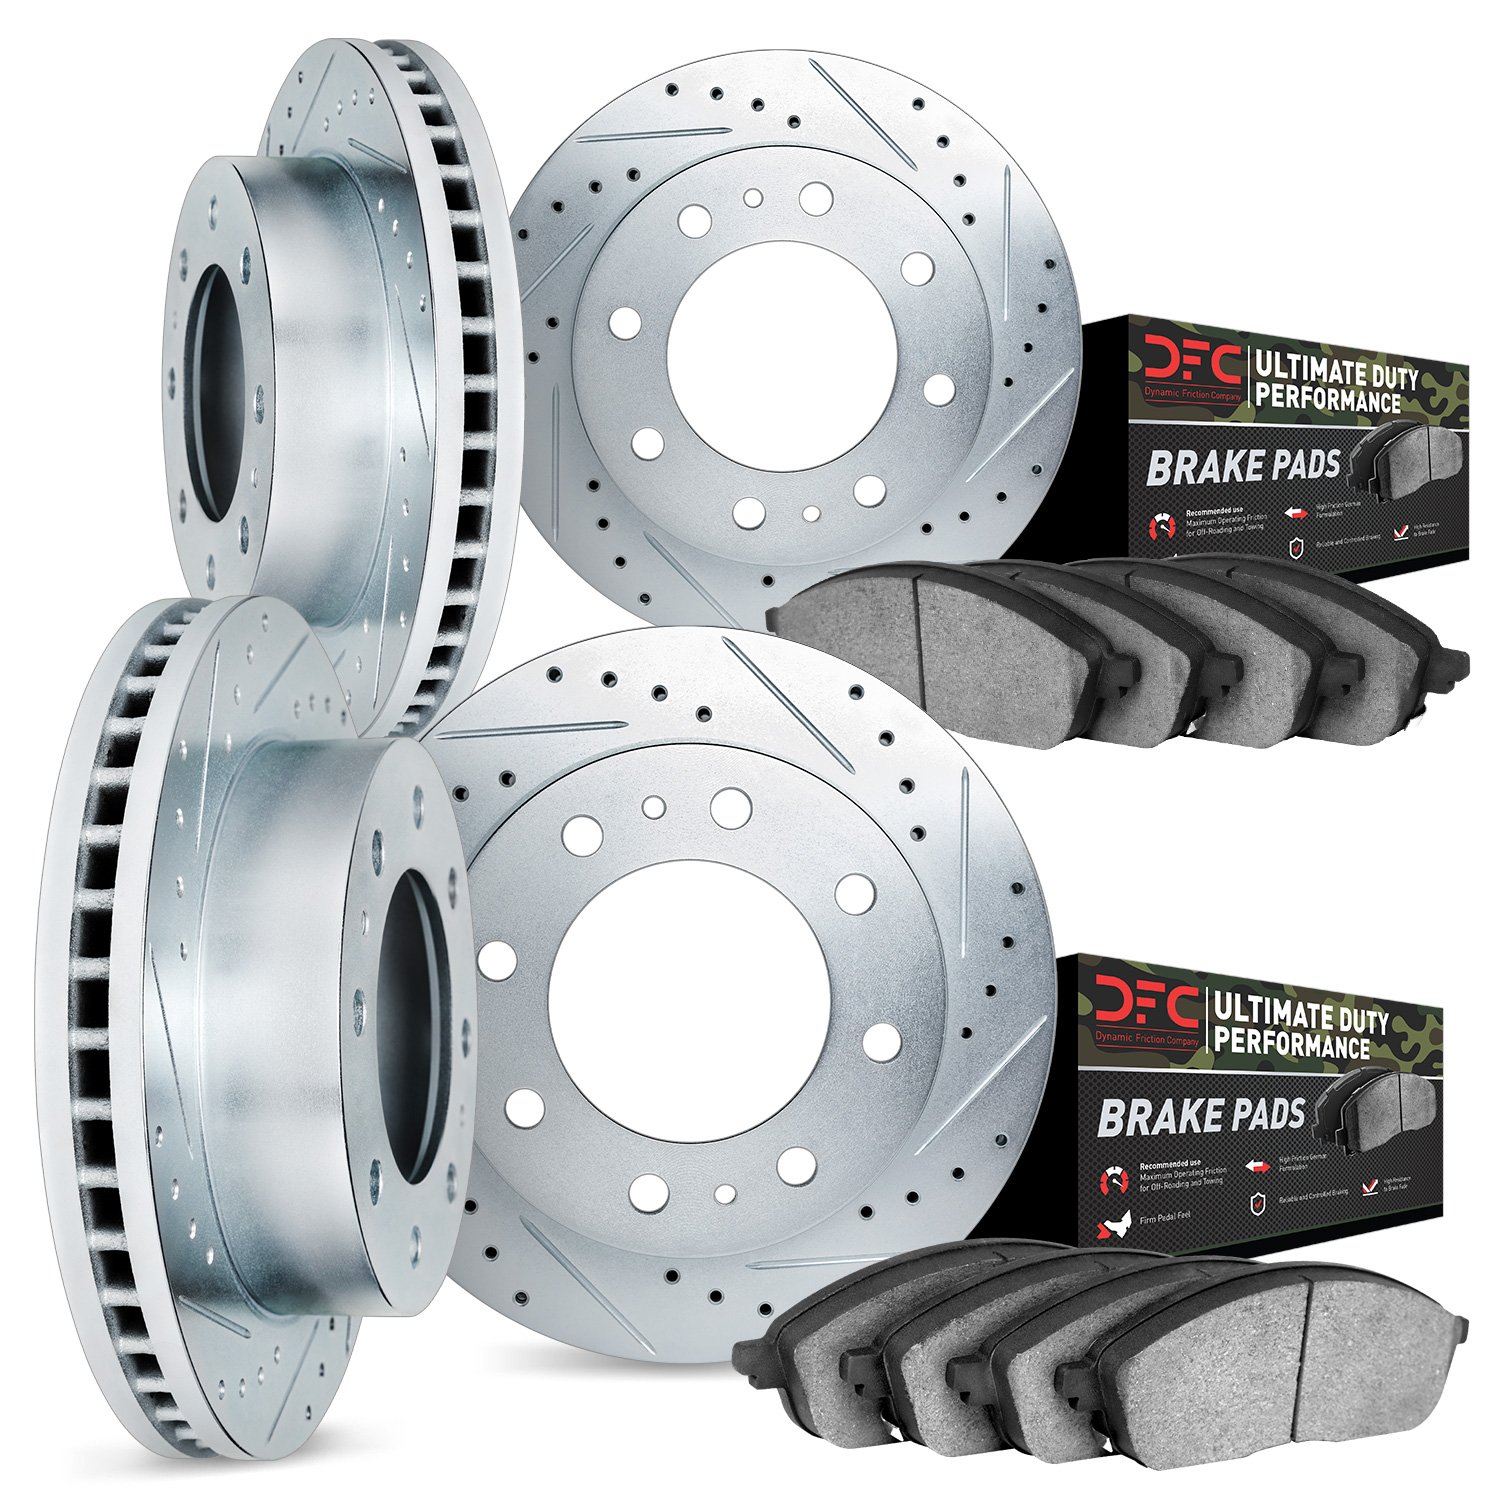 7404-46002 Drilled/Slotted Brake Rotors with Ultimate-Duty Brake Pads Kit [Silver], 2000-2005 GM, Position: Front and Rear